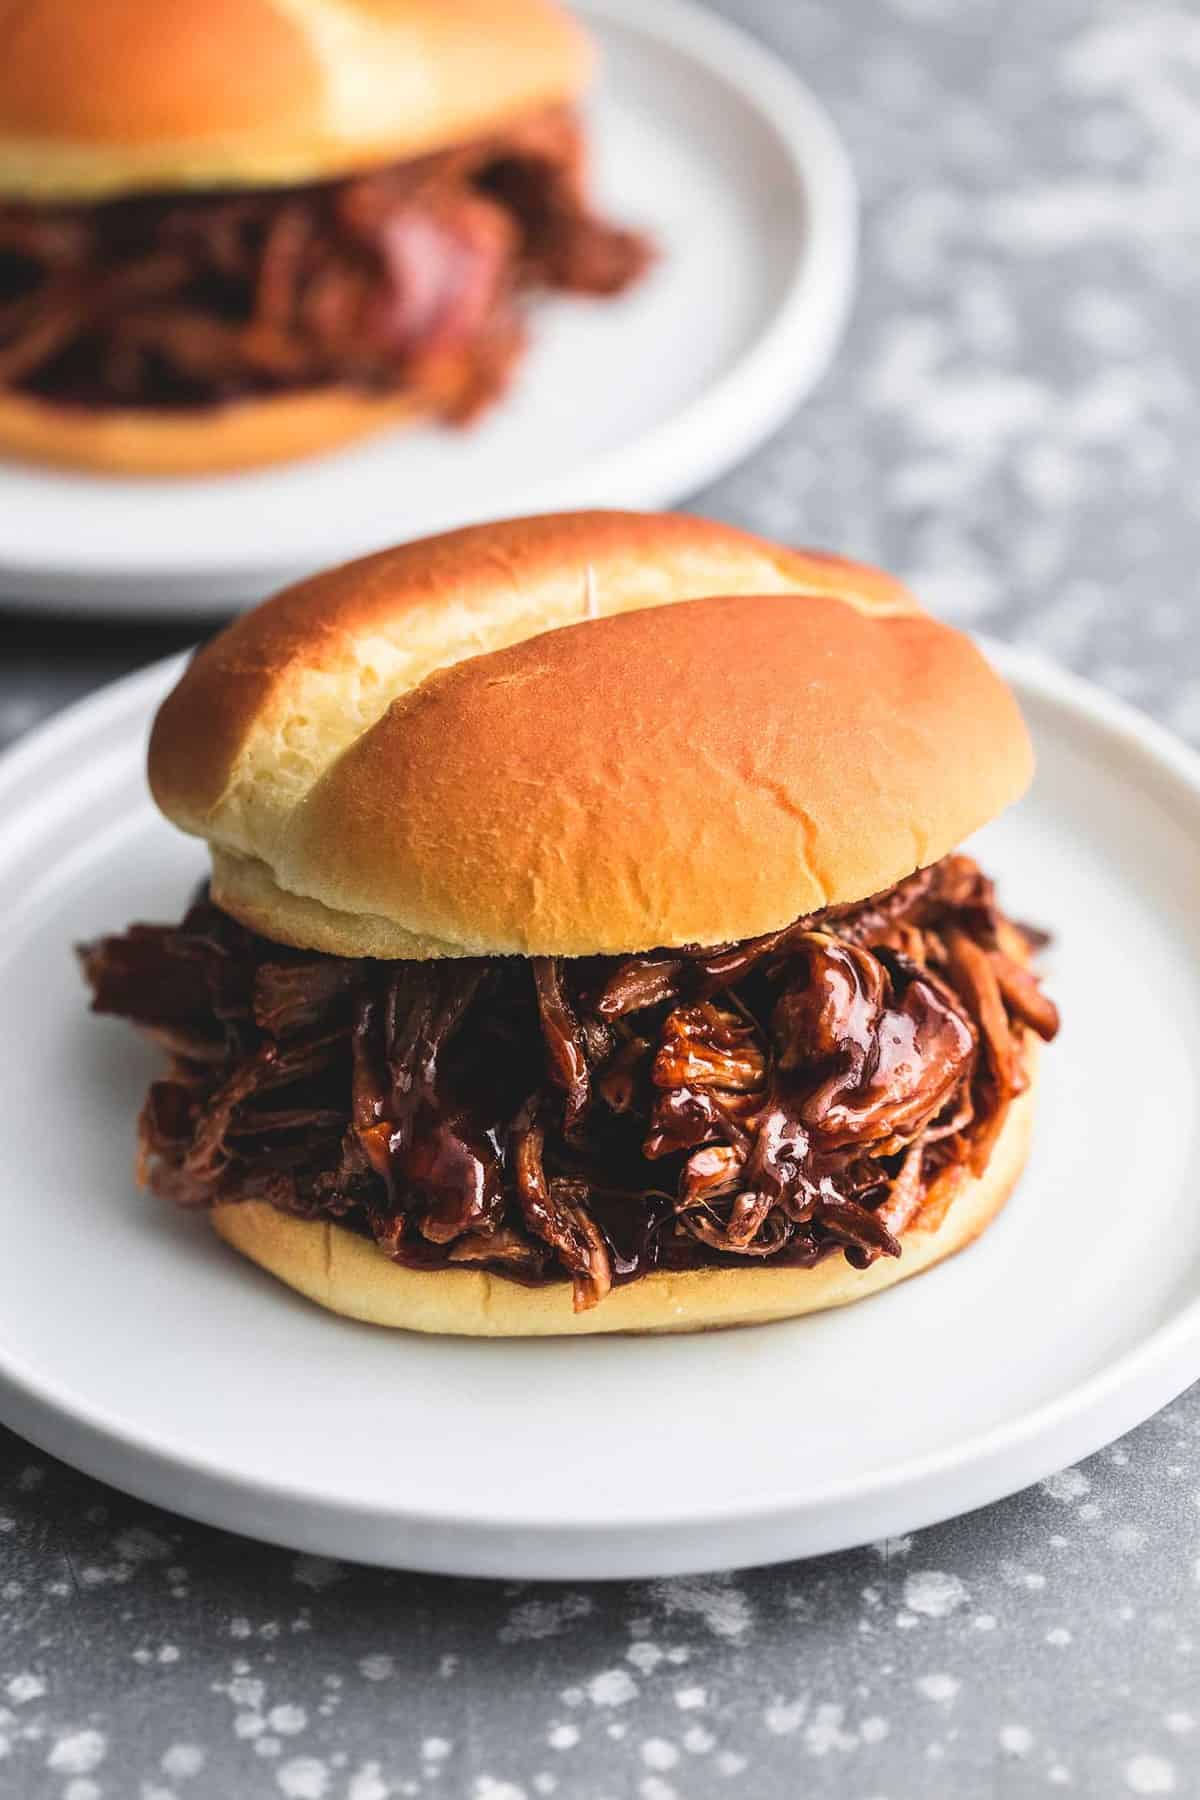 up close view of a whole sandwich with pulled meat and bbq sauce in front of a second half-plate.